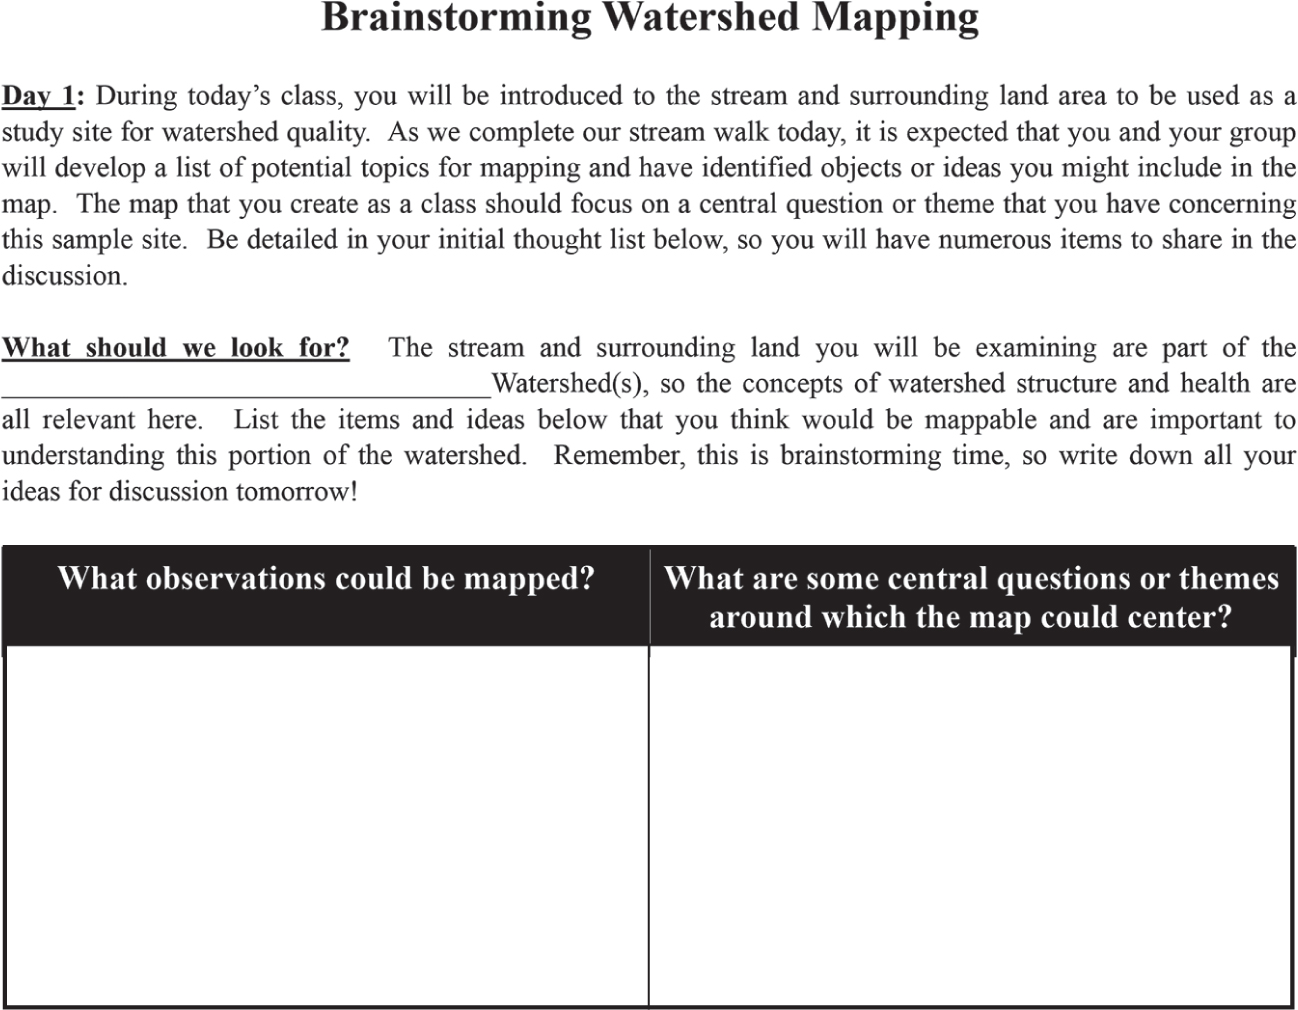 Brainstorming watershed mapping handout